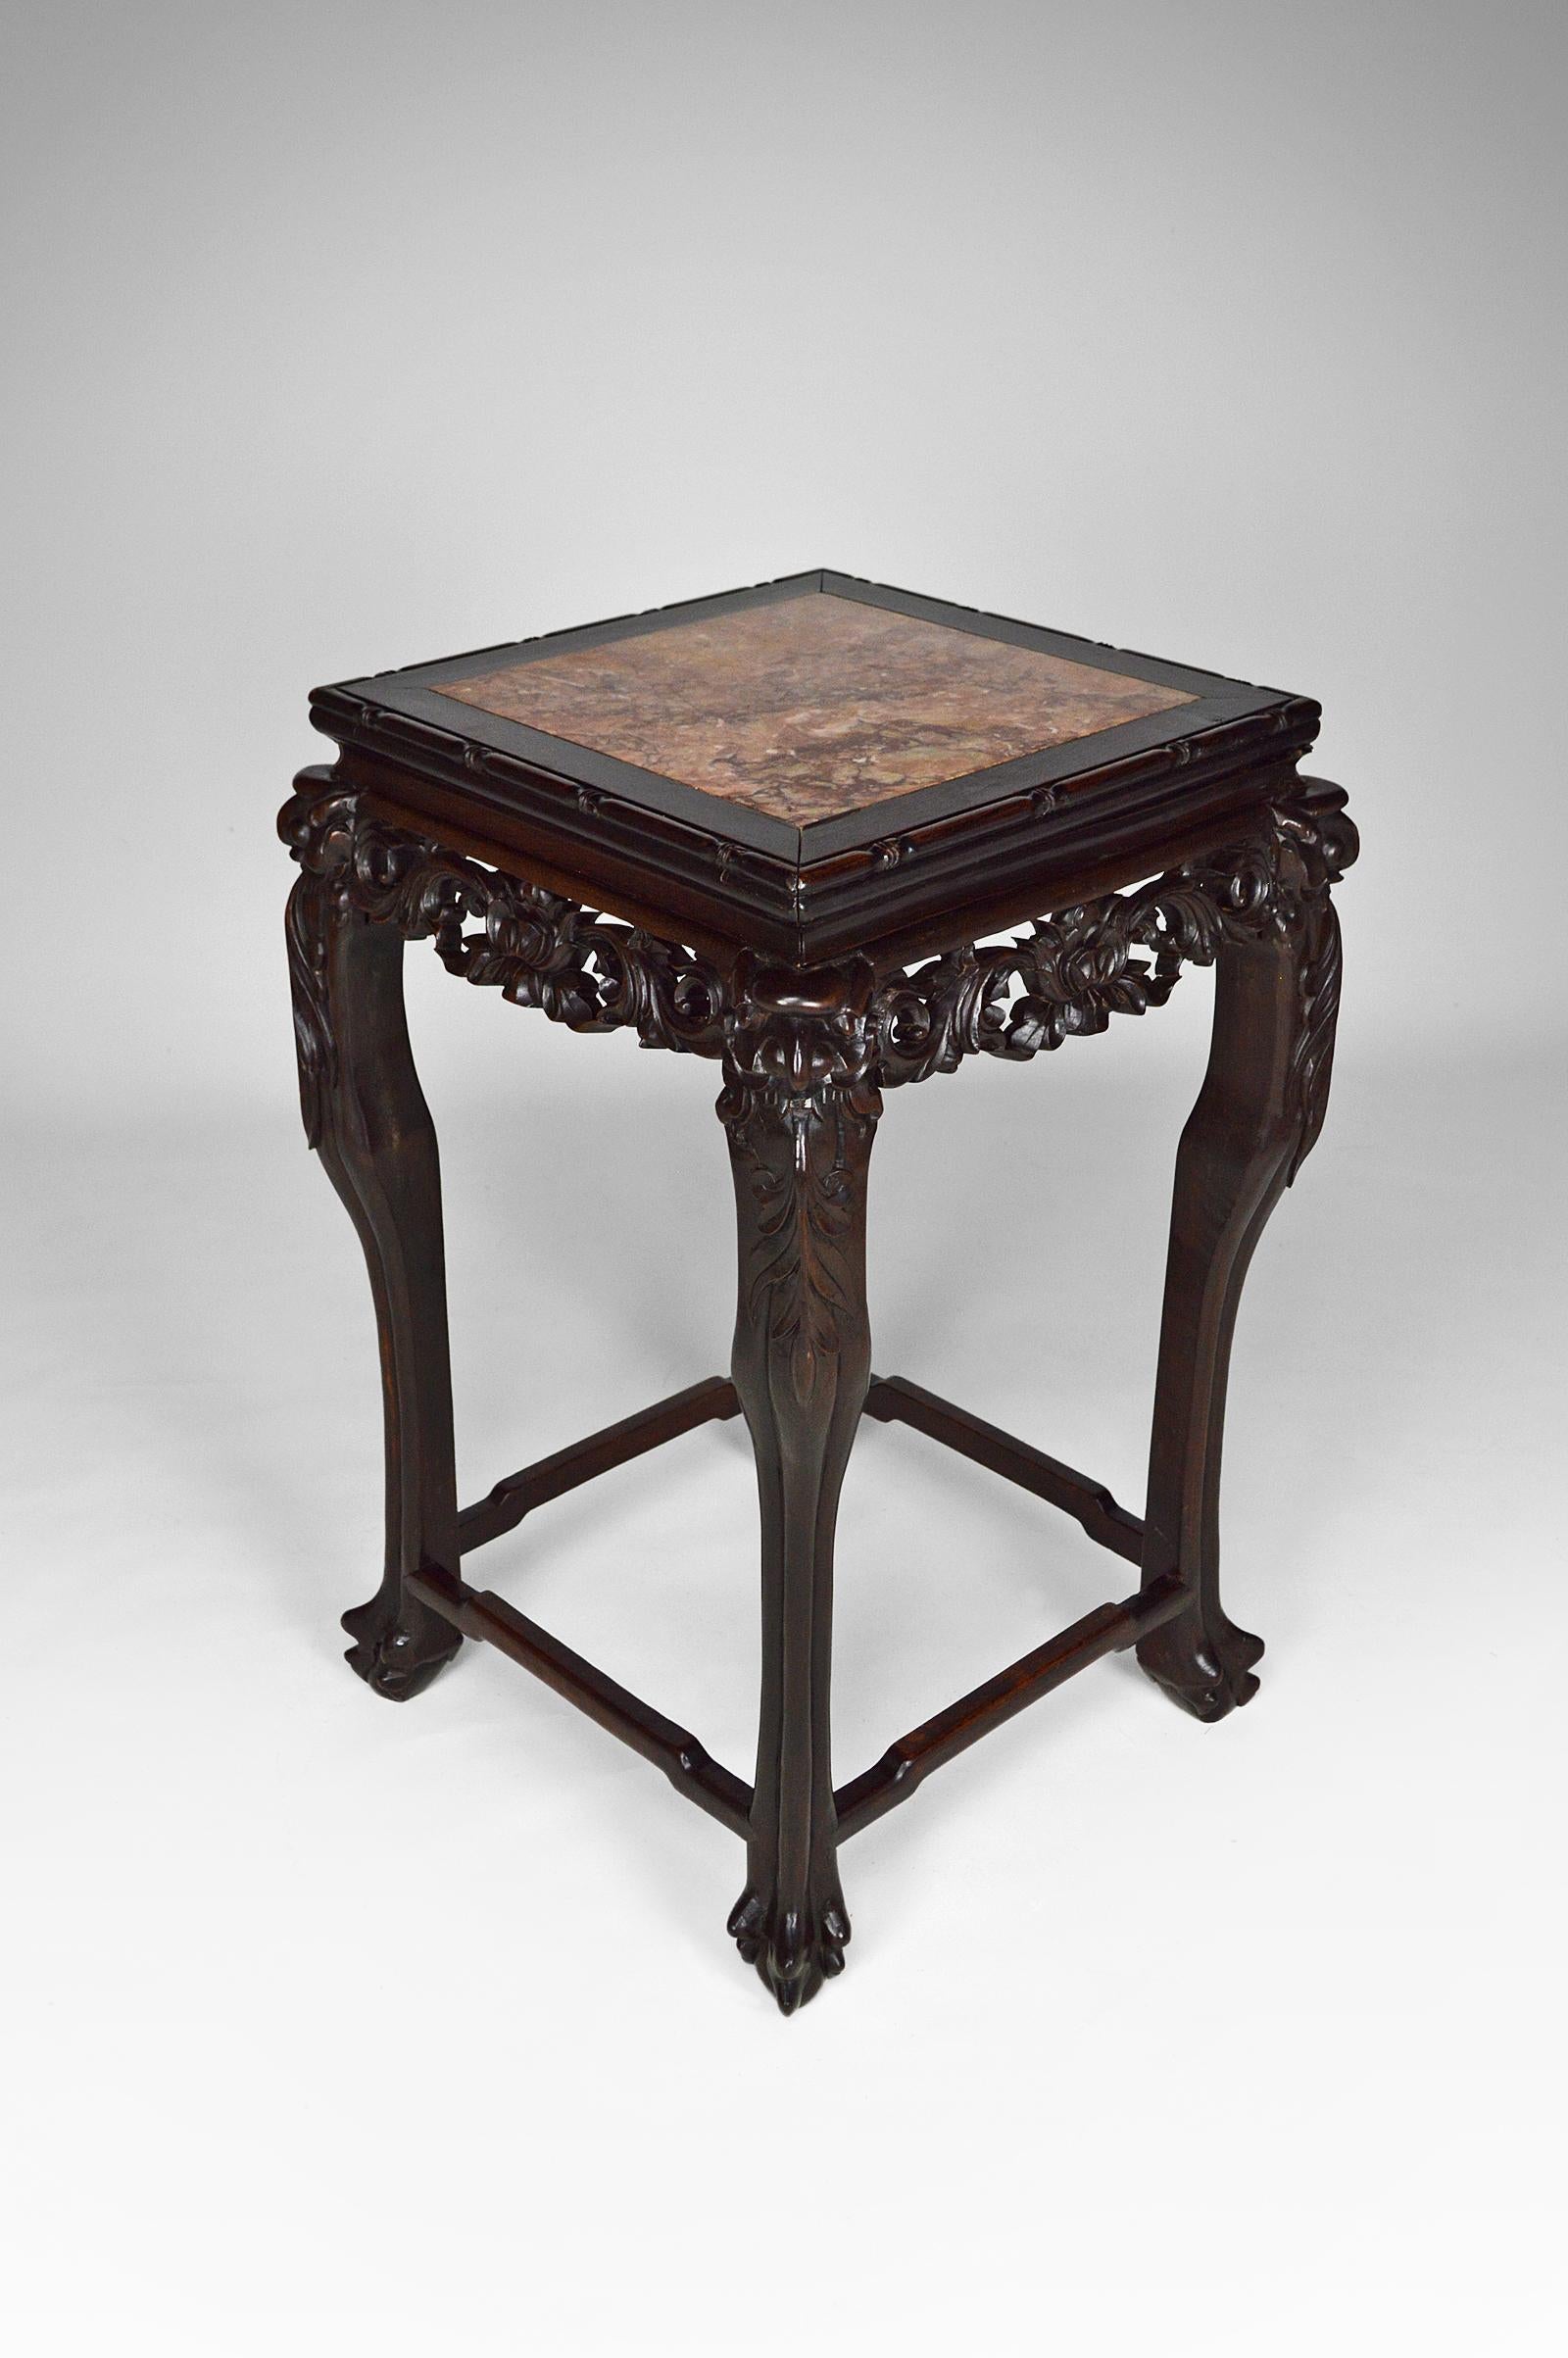 East Asian Asian Carved Pedestal Table with Marble Top, Dragons and Flowers, circa 1890 For Sale